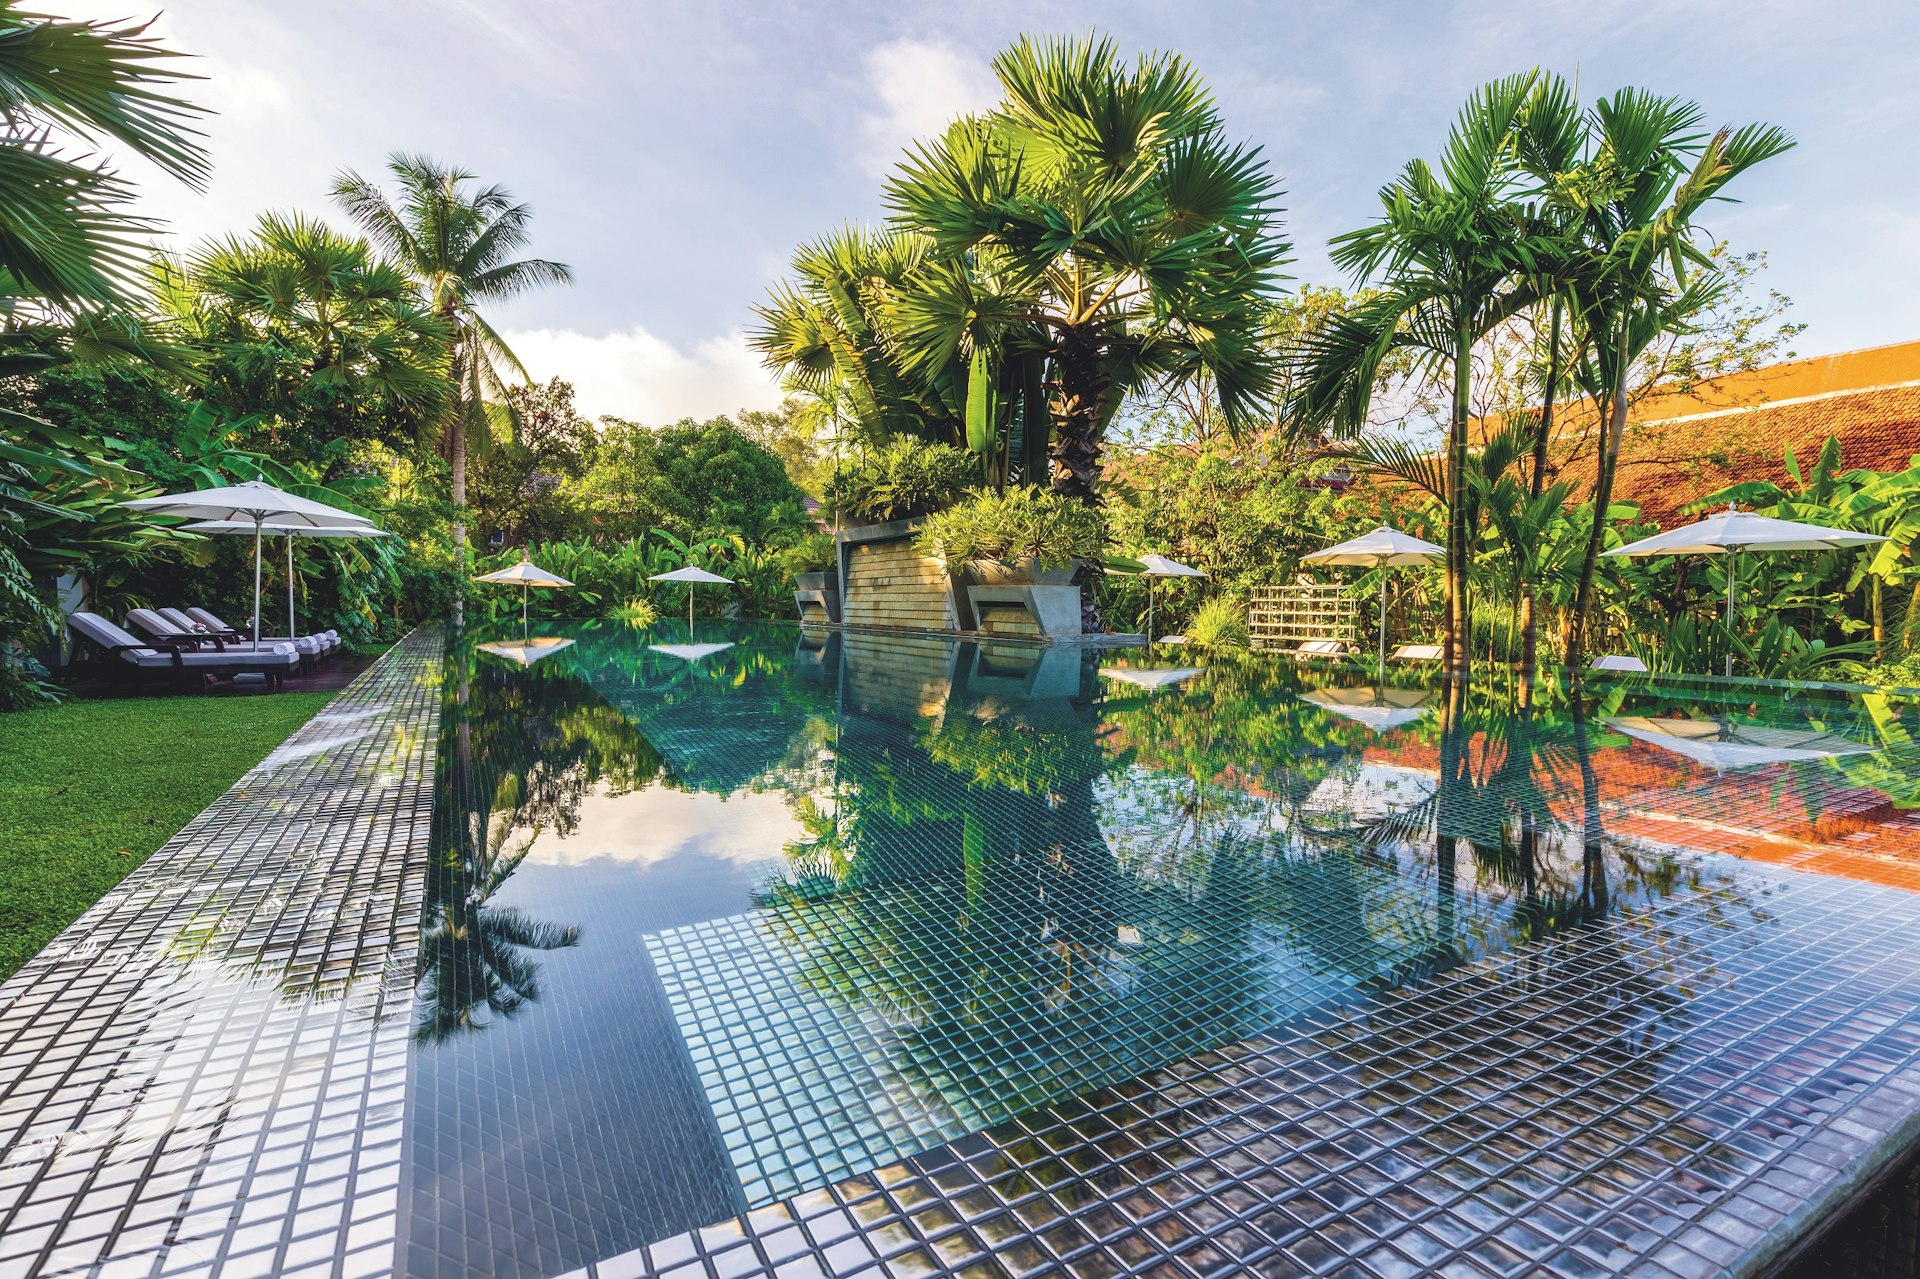 A swimming pool set in a green garden lined with palm trees